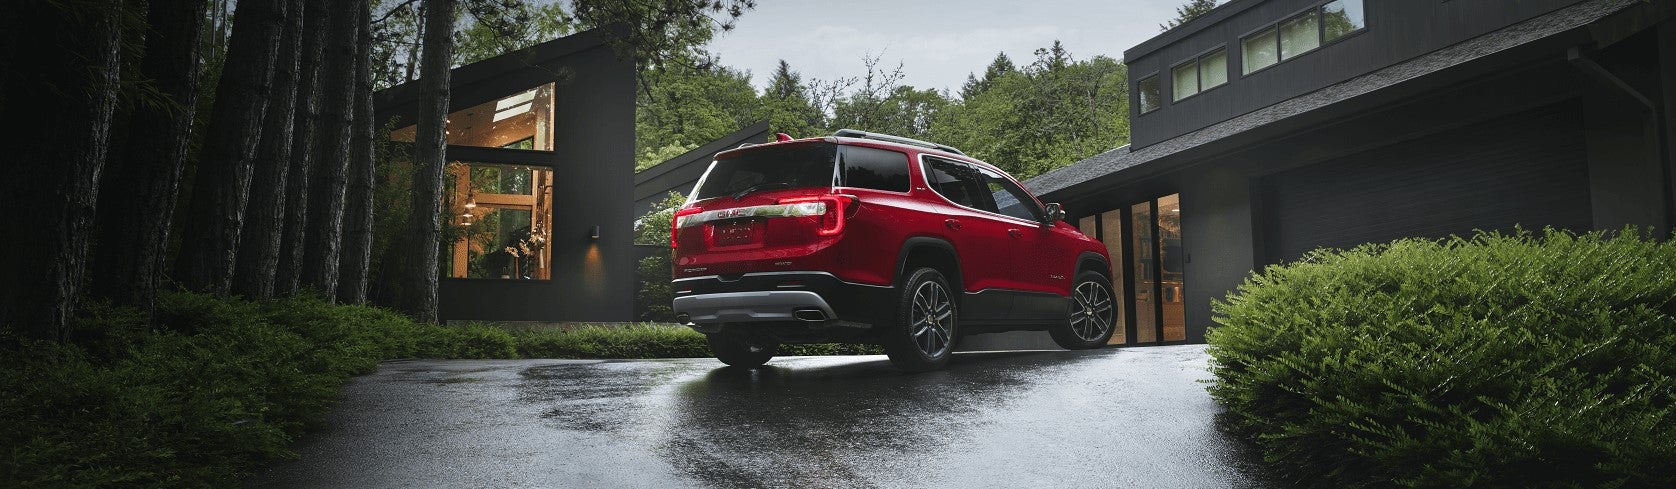 2021 GMC Acadia Review Fishers IN